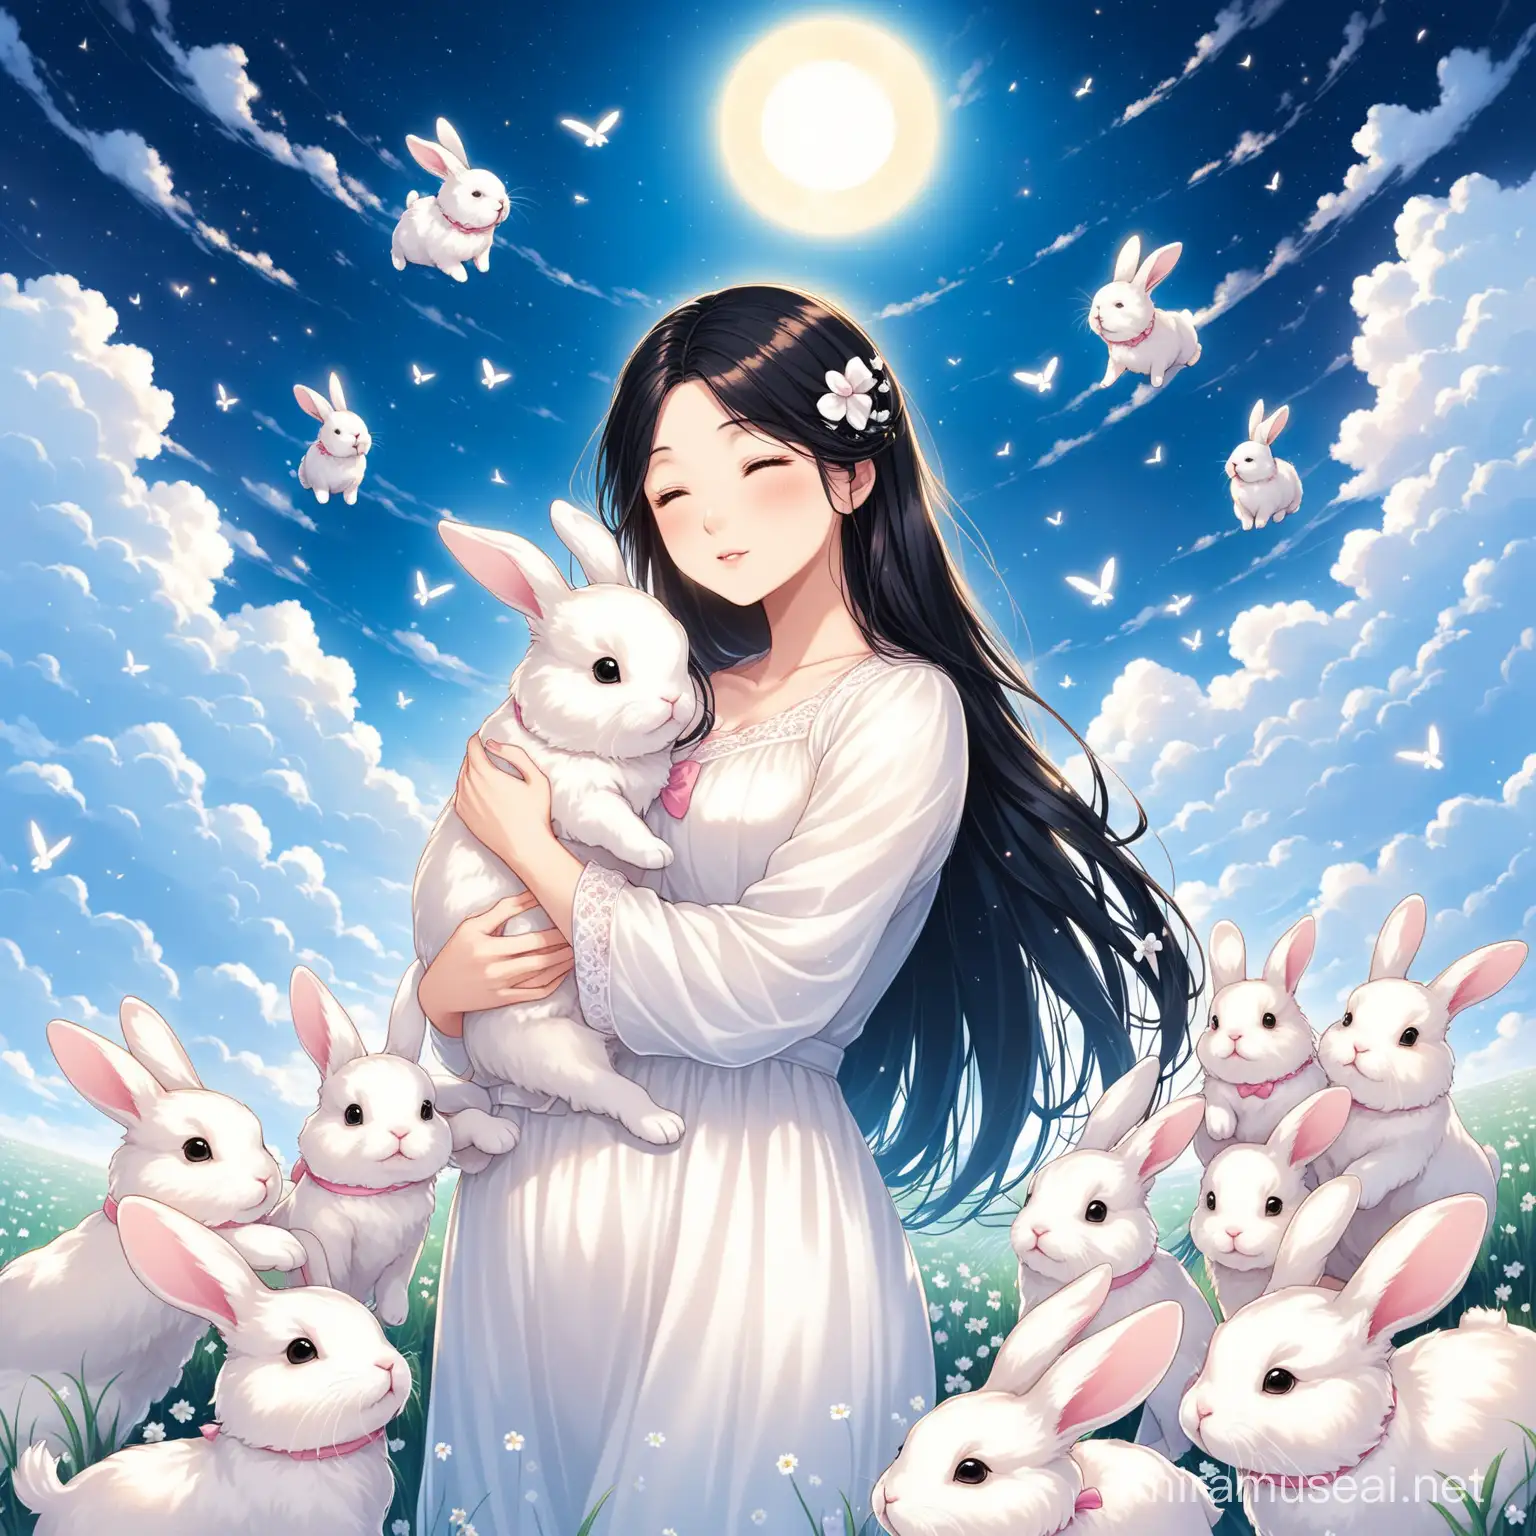 Daughter Remembers Mother in Heaven Amidst Bunny and Puppyfilled Sky